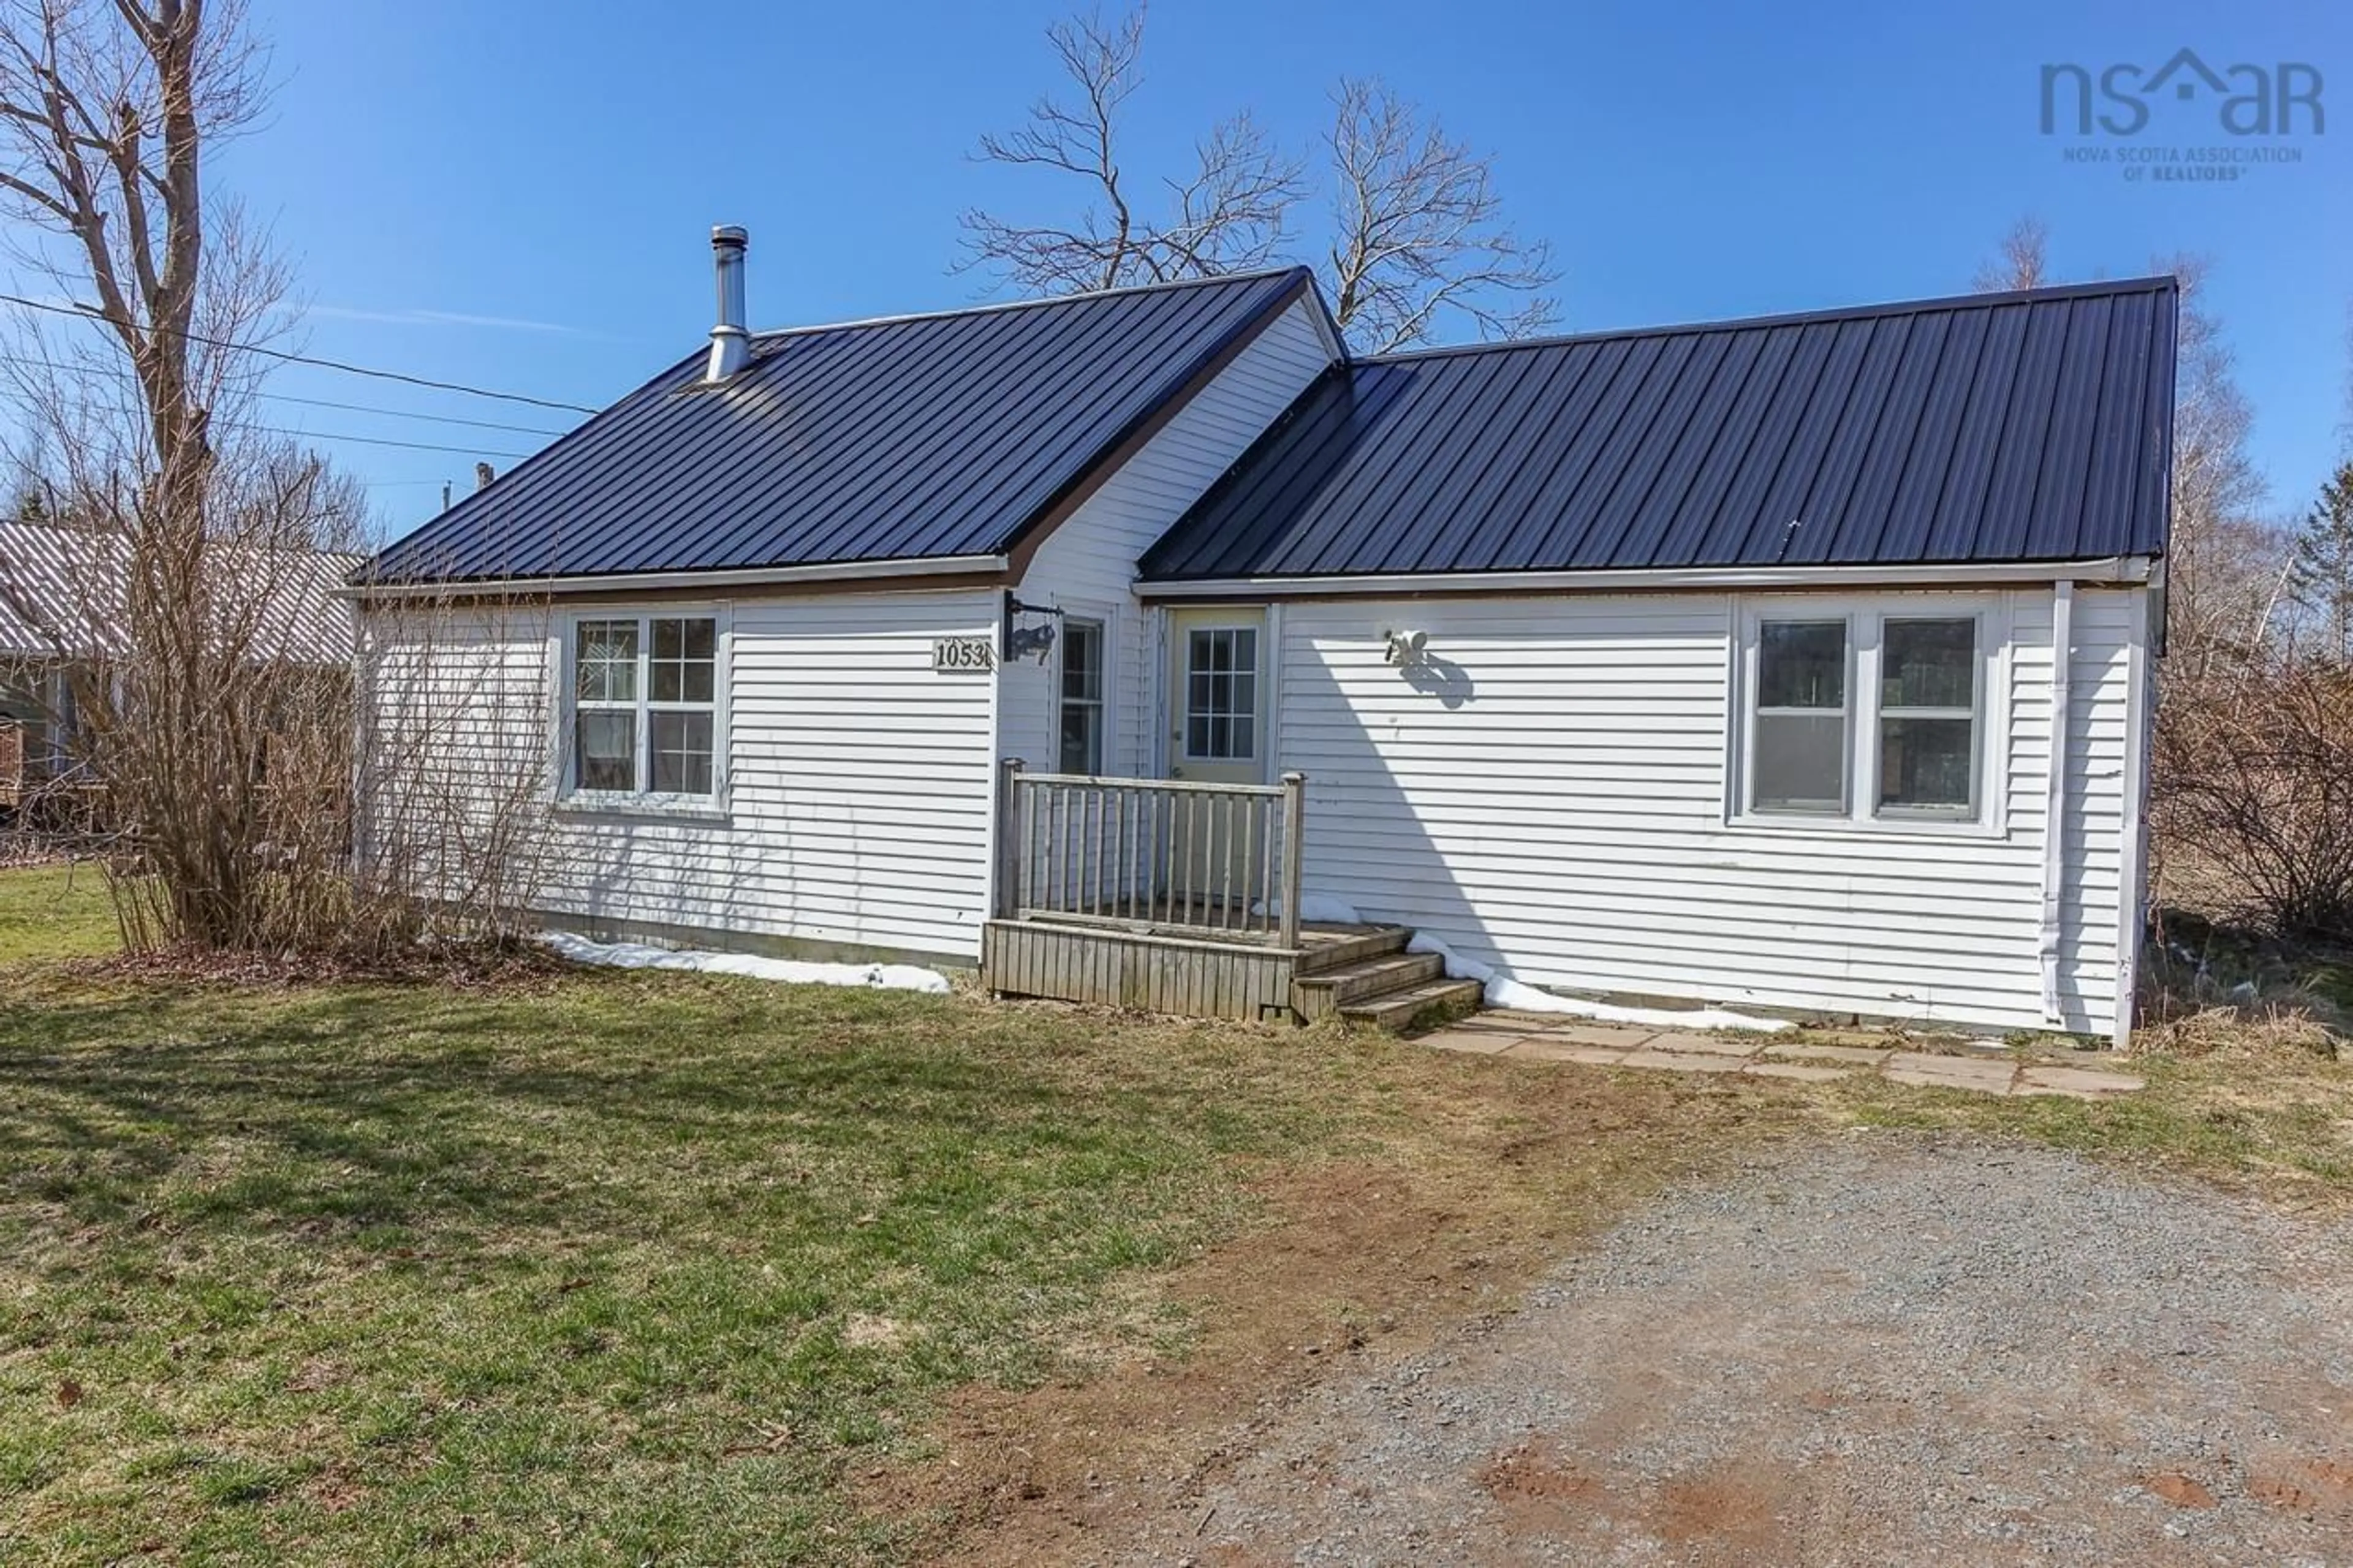 Outside view for 1053 Chapel Rd, Canning Nova Scotia B0P 1H0